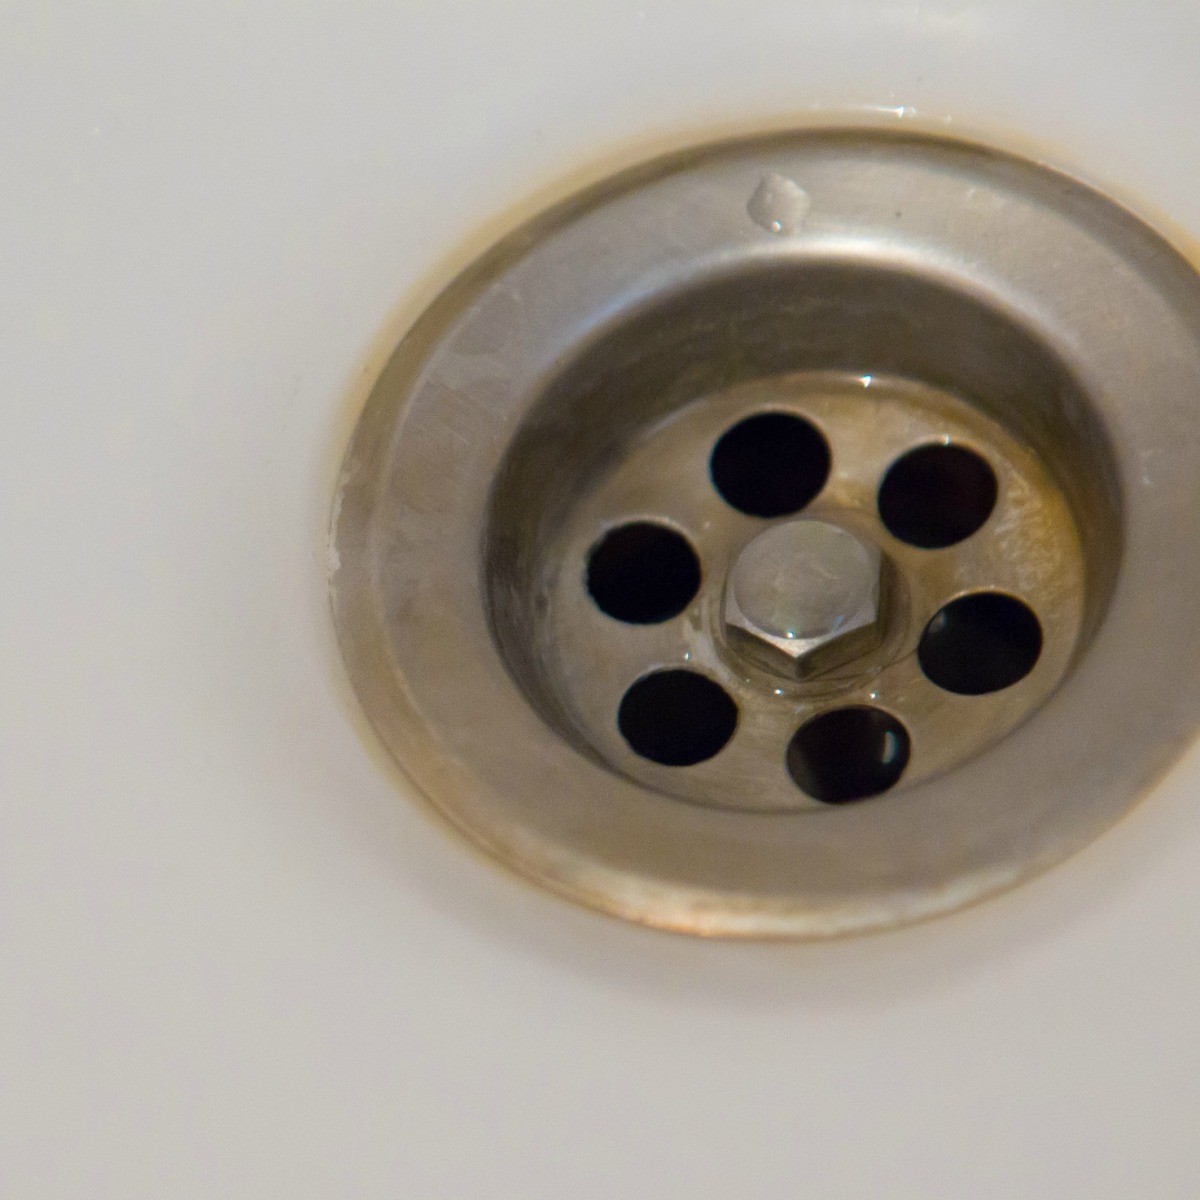 Cleaning Stains Around A Bathtub Drain, How To Clean Corrosion From Bathtub Drain